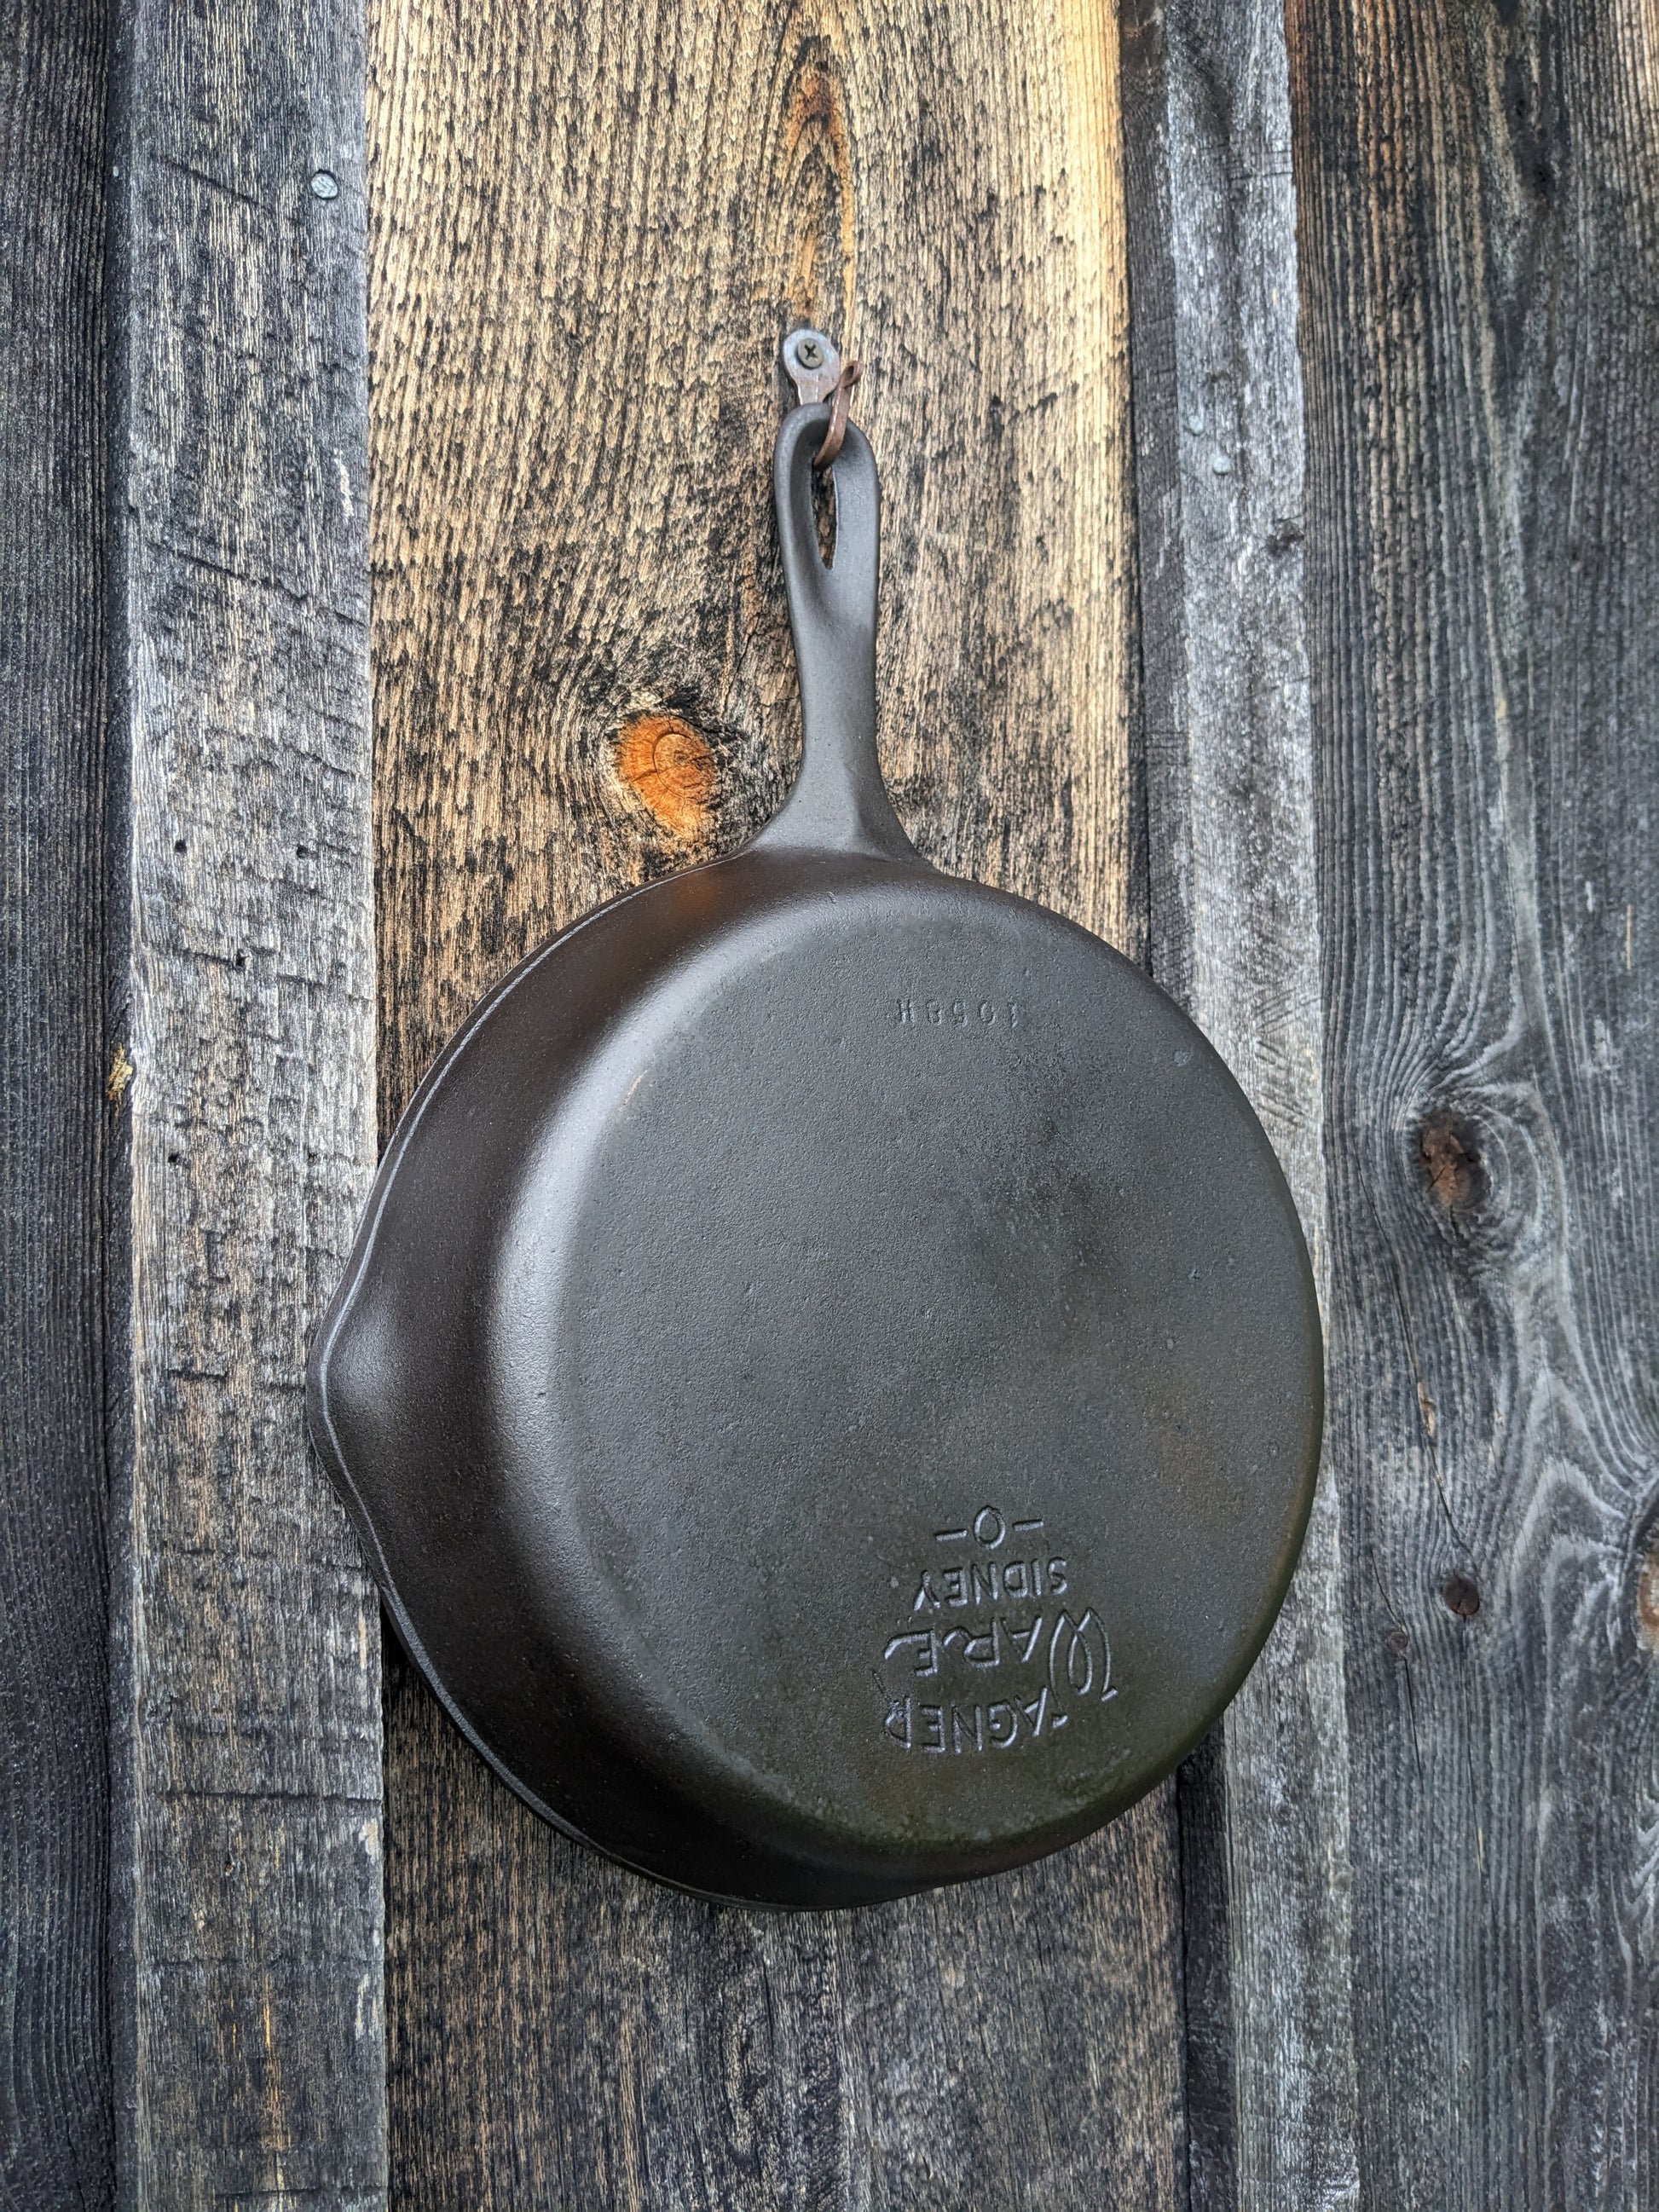 Wagner Ware No.9 Pie Logo Cast Iron Skillet 1058 A